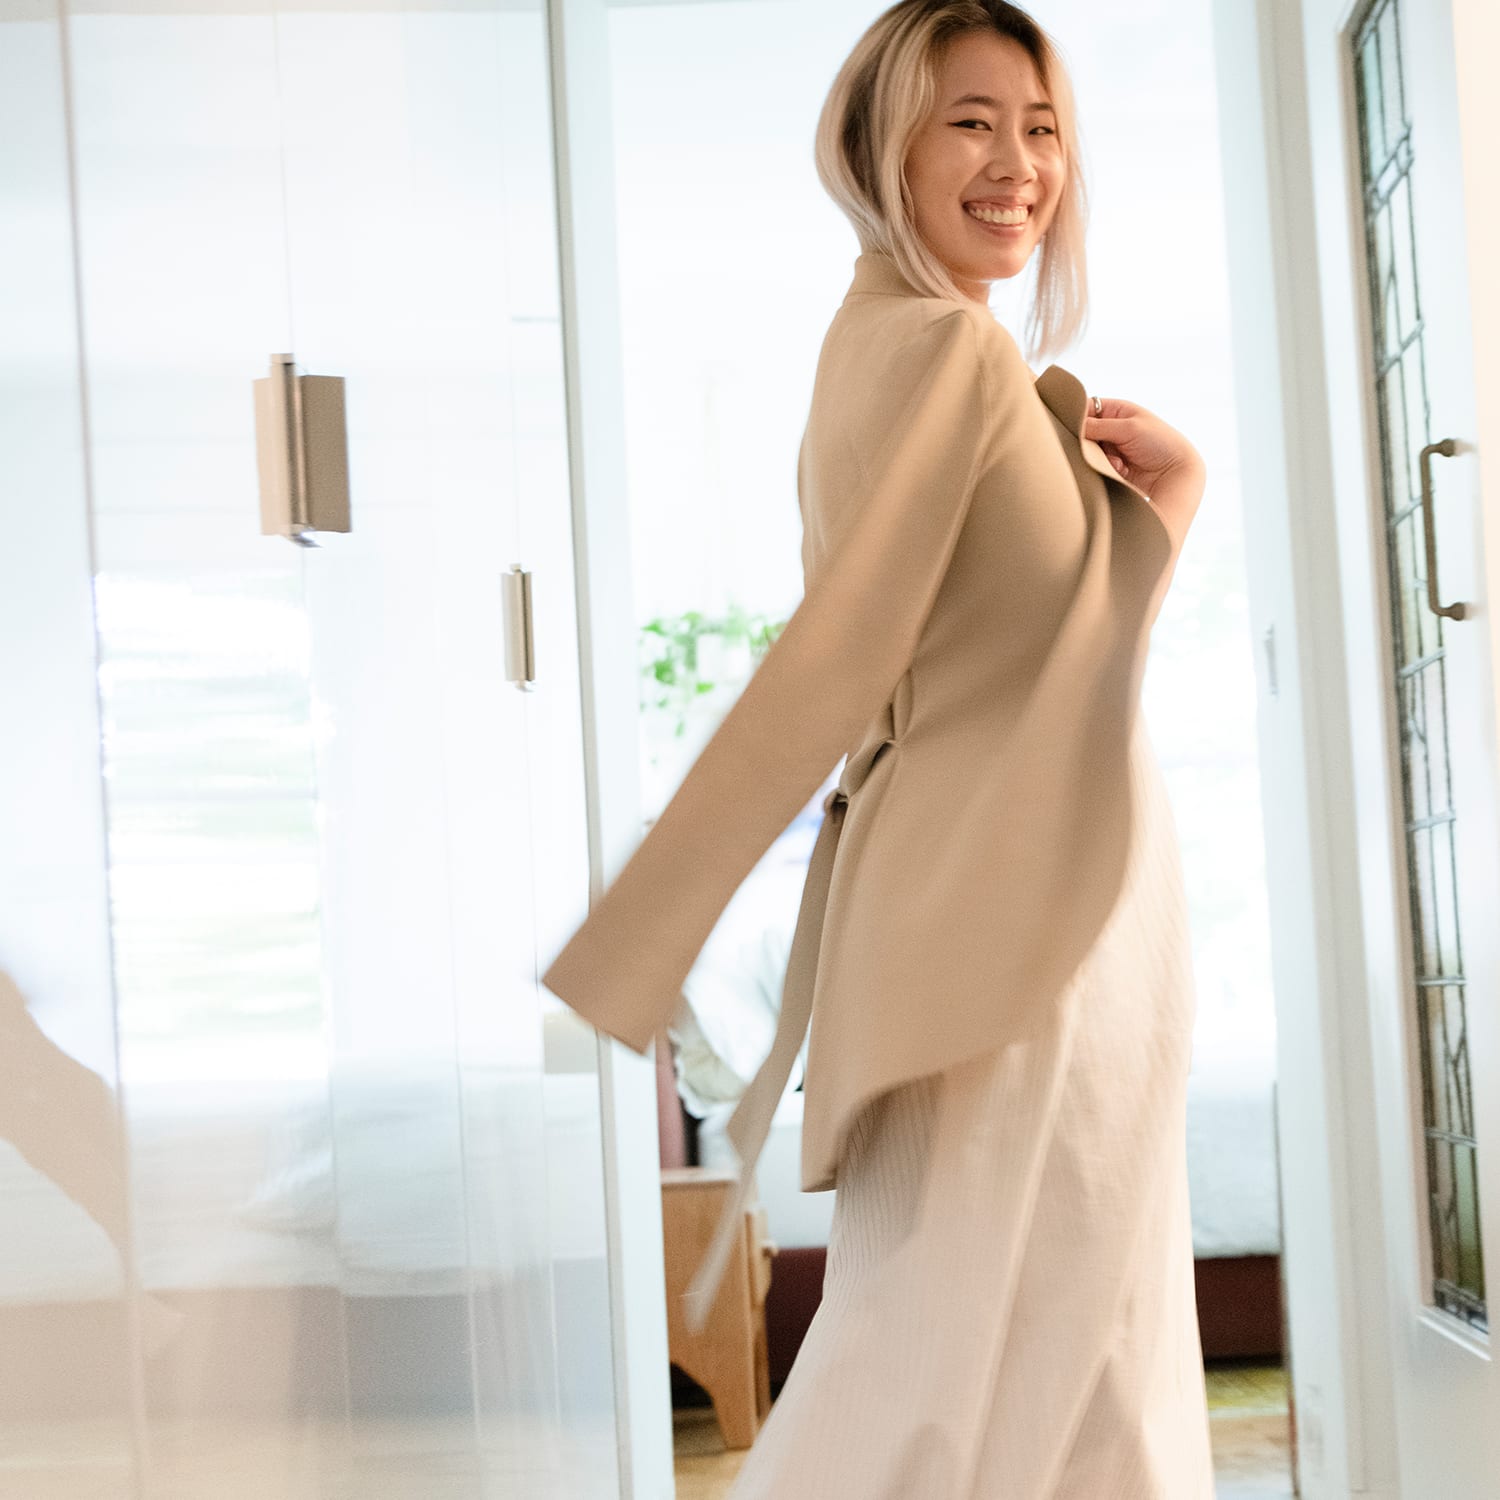 woman wearing tan jacket over her shoulders and long white dress, smiling in an apartment hallway